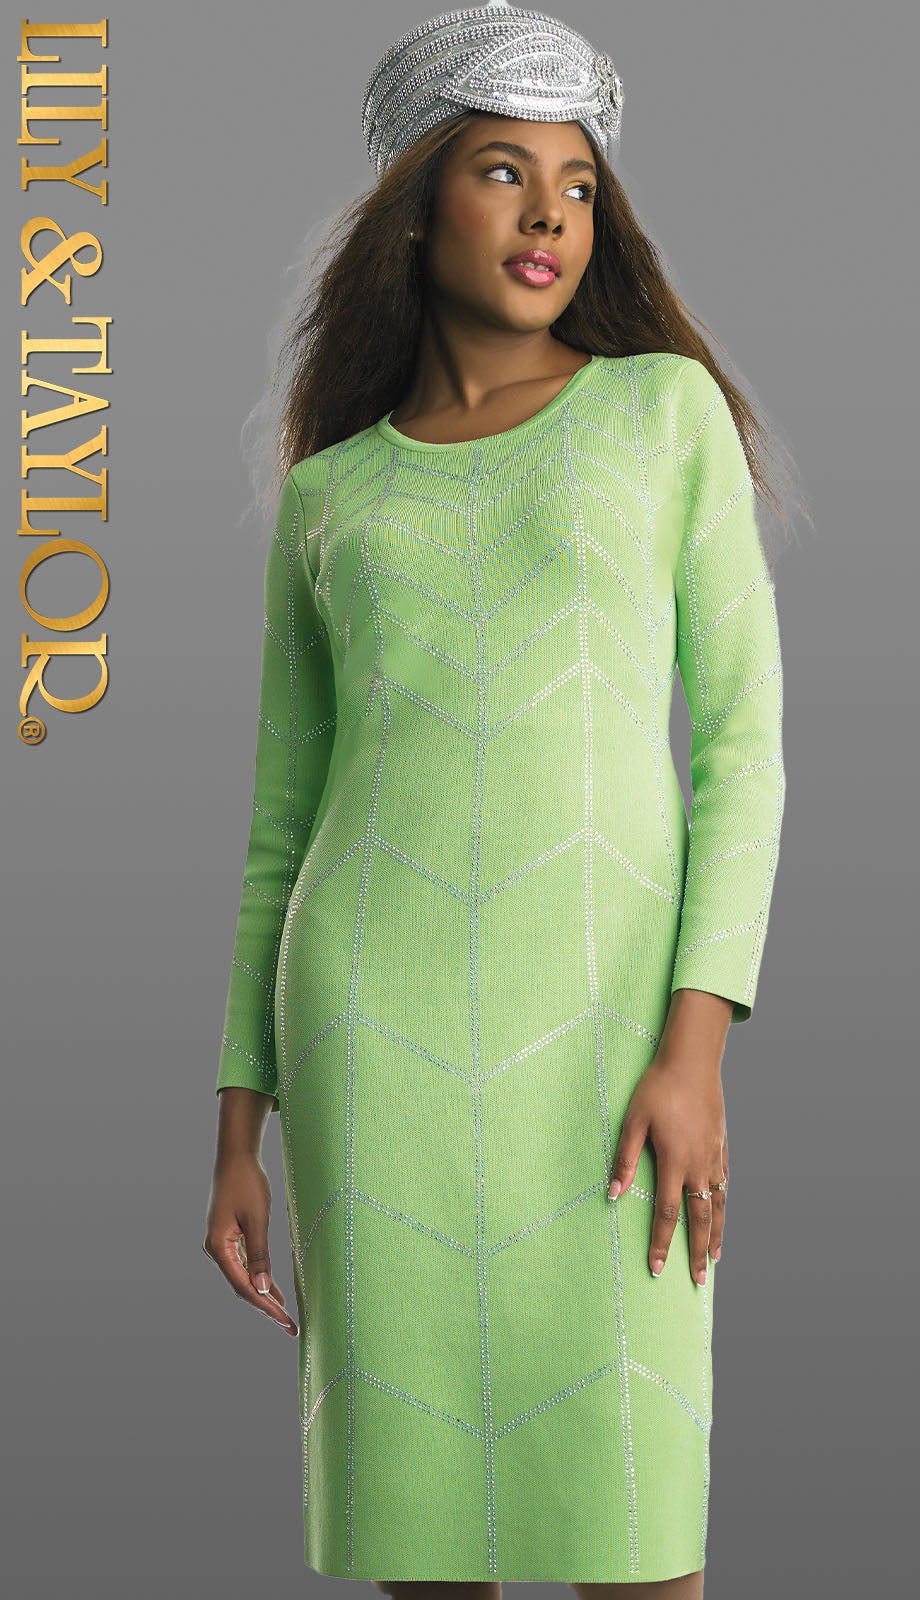 Lily and Taylor 602-GRN Knit Church Dress